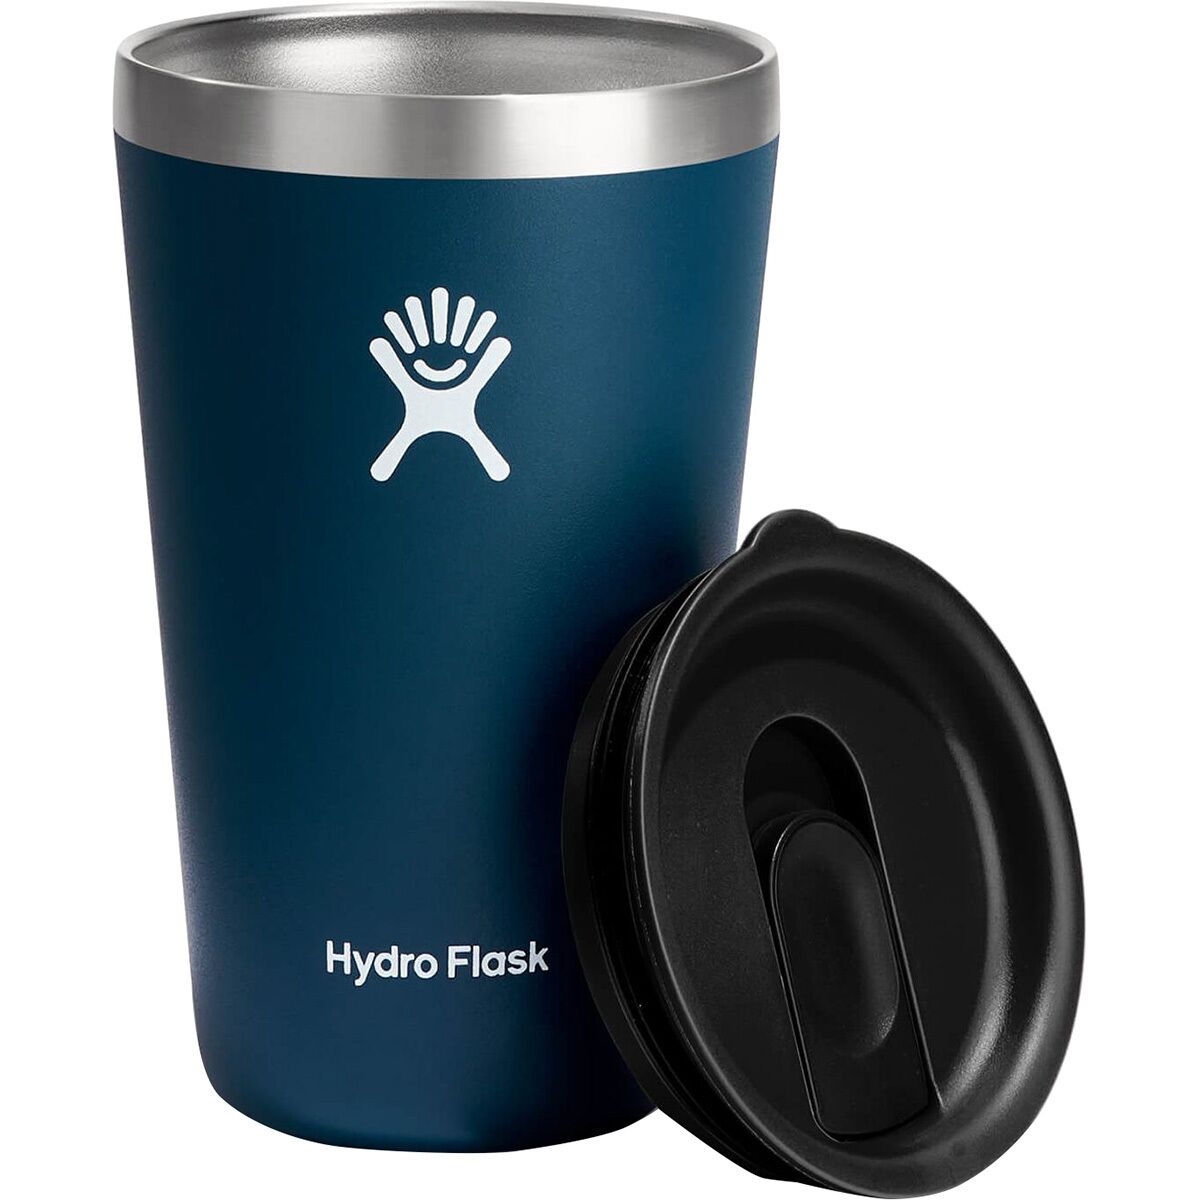 Memento PDX - The 16oz tumbler from Hydroflask, now comes